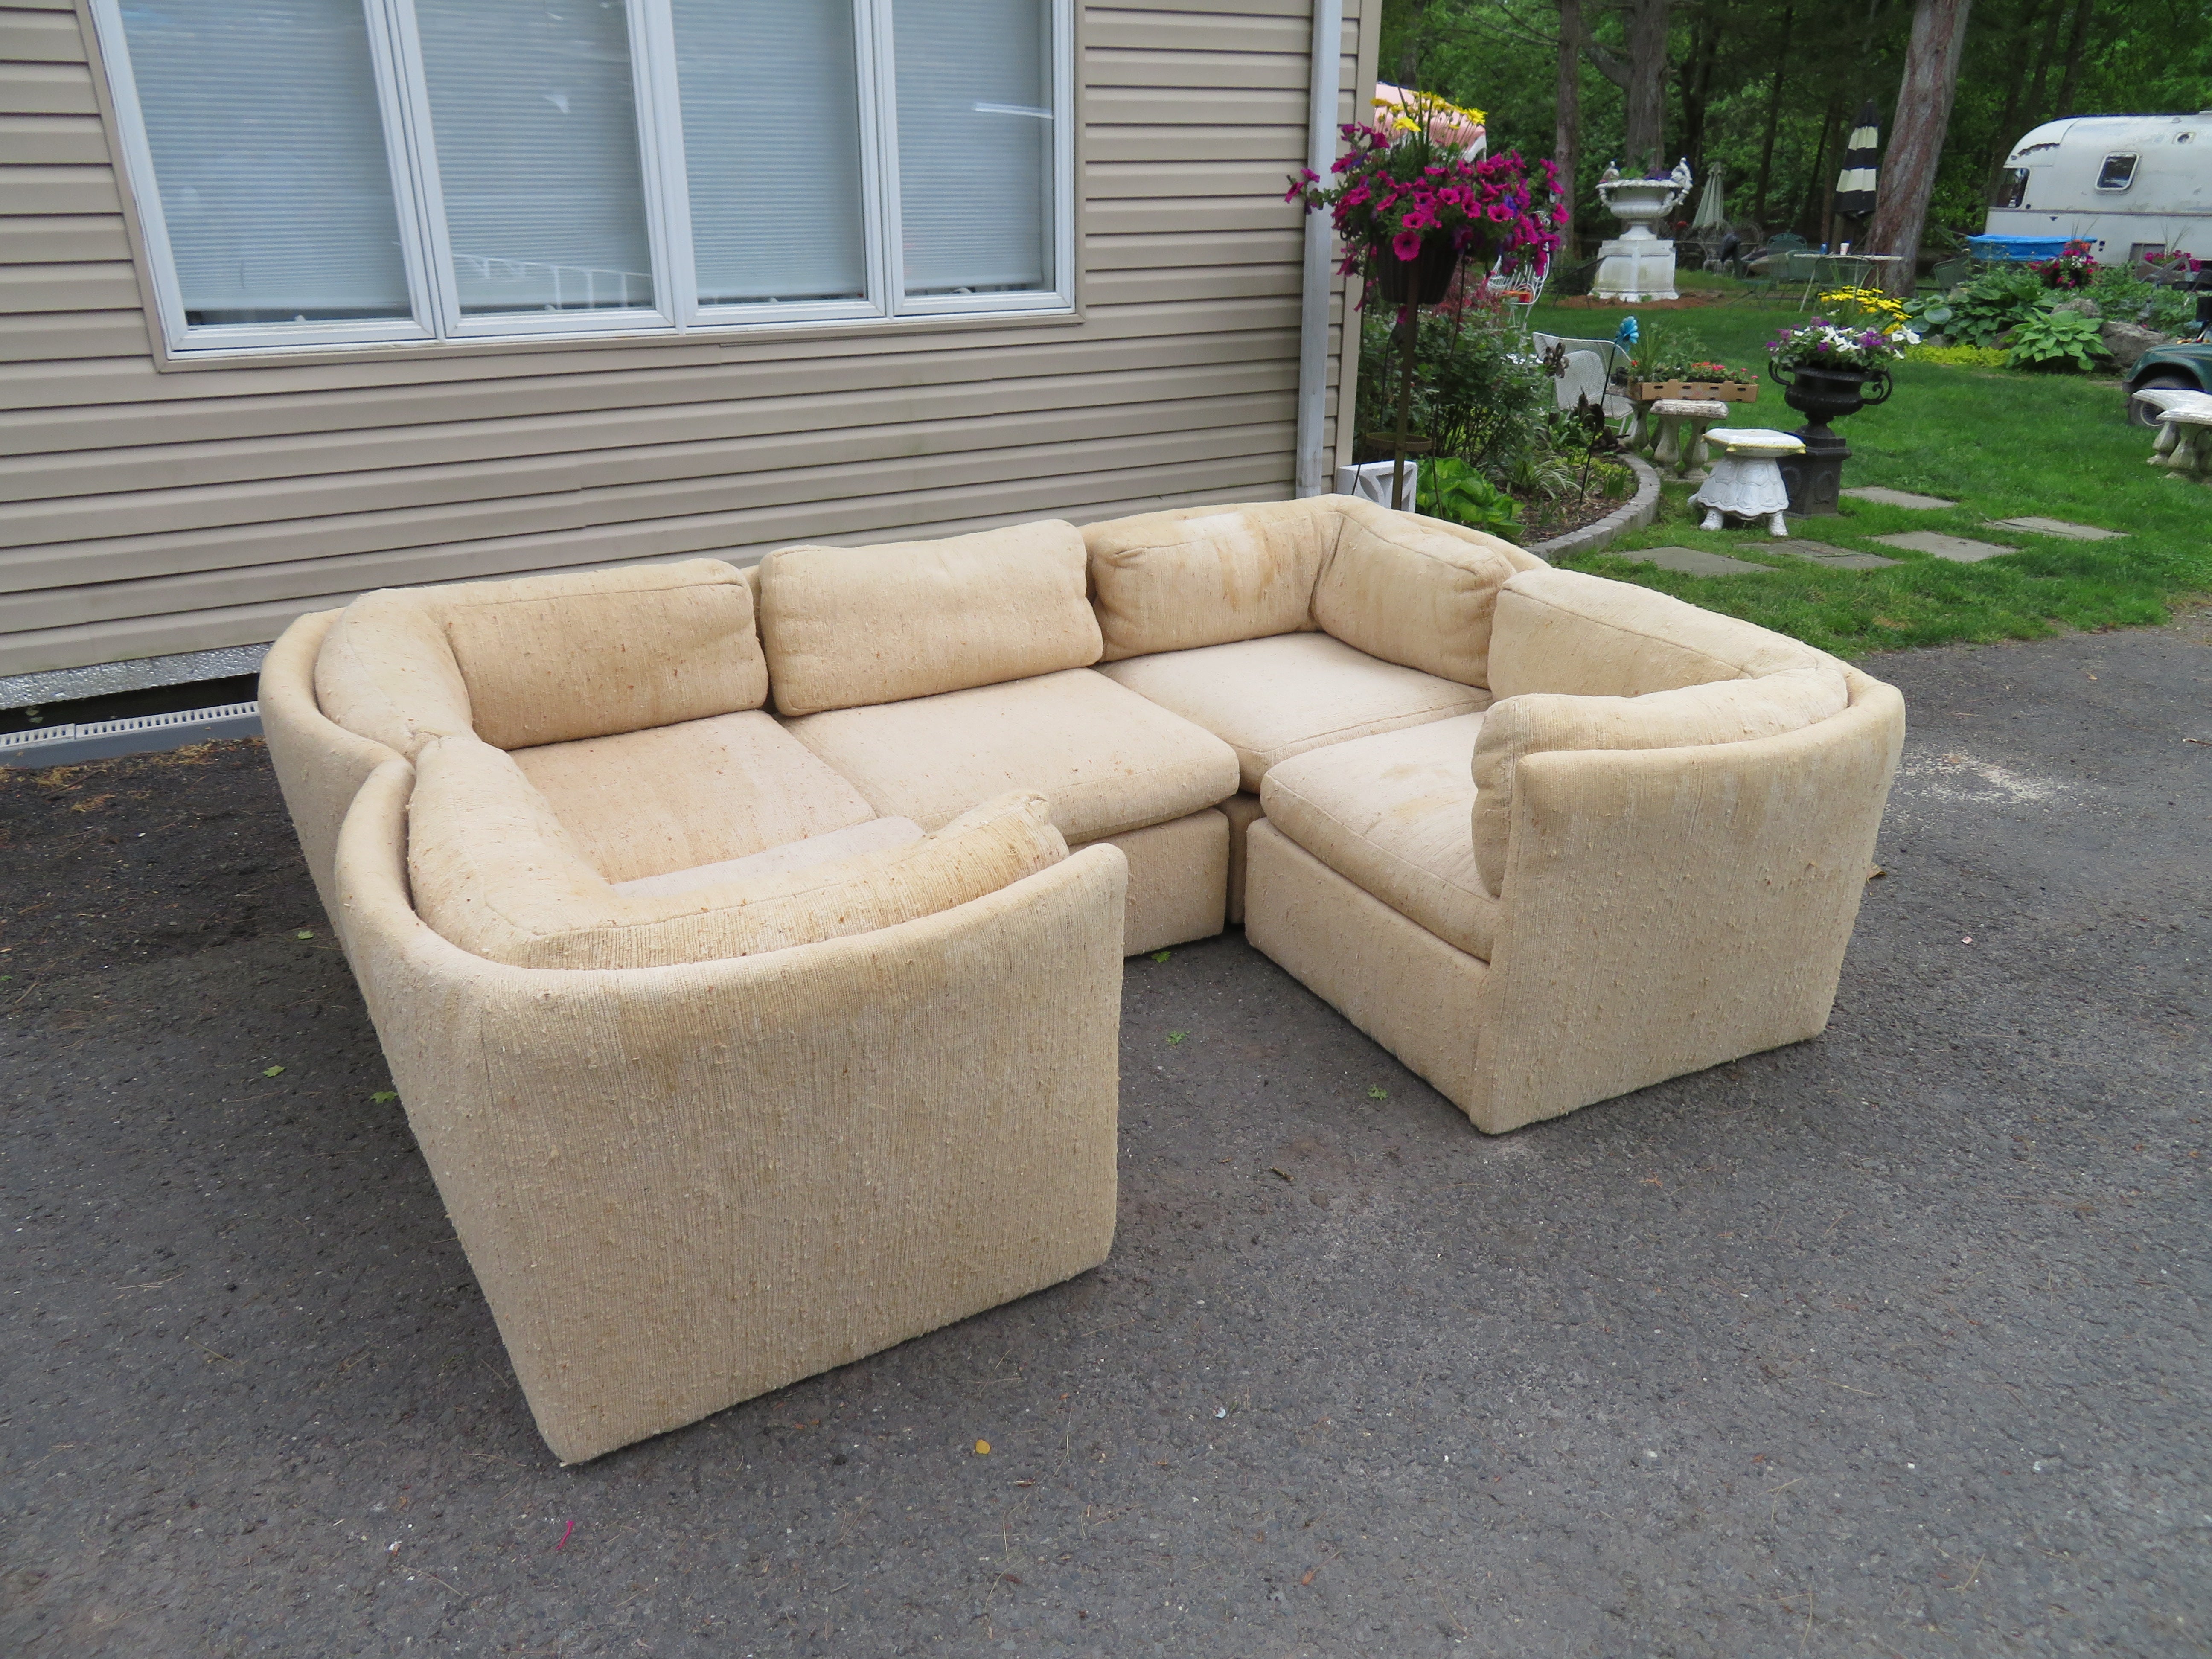 Fabulous Milo Baughman for Thayer Coggin 5 piece curved back cube sectional sofa. This sectional has some wear to the original fabric and will need to be reupholstered. The sofa measures as shown 26